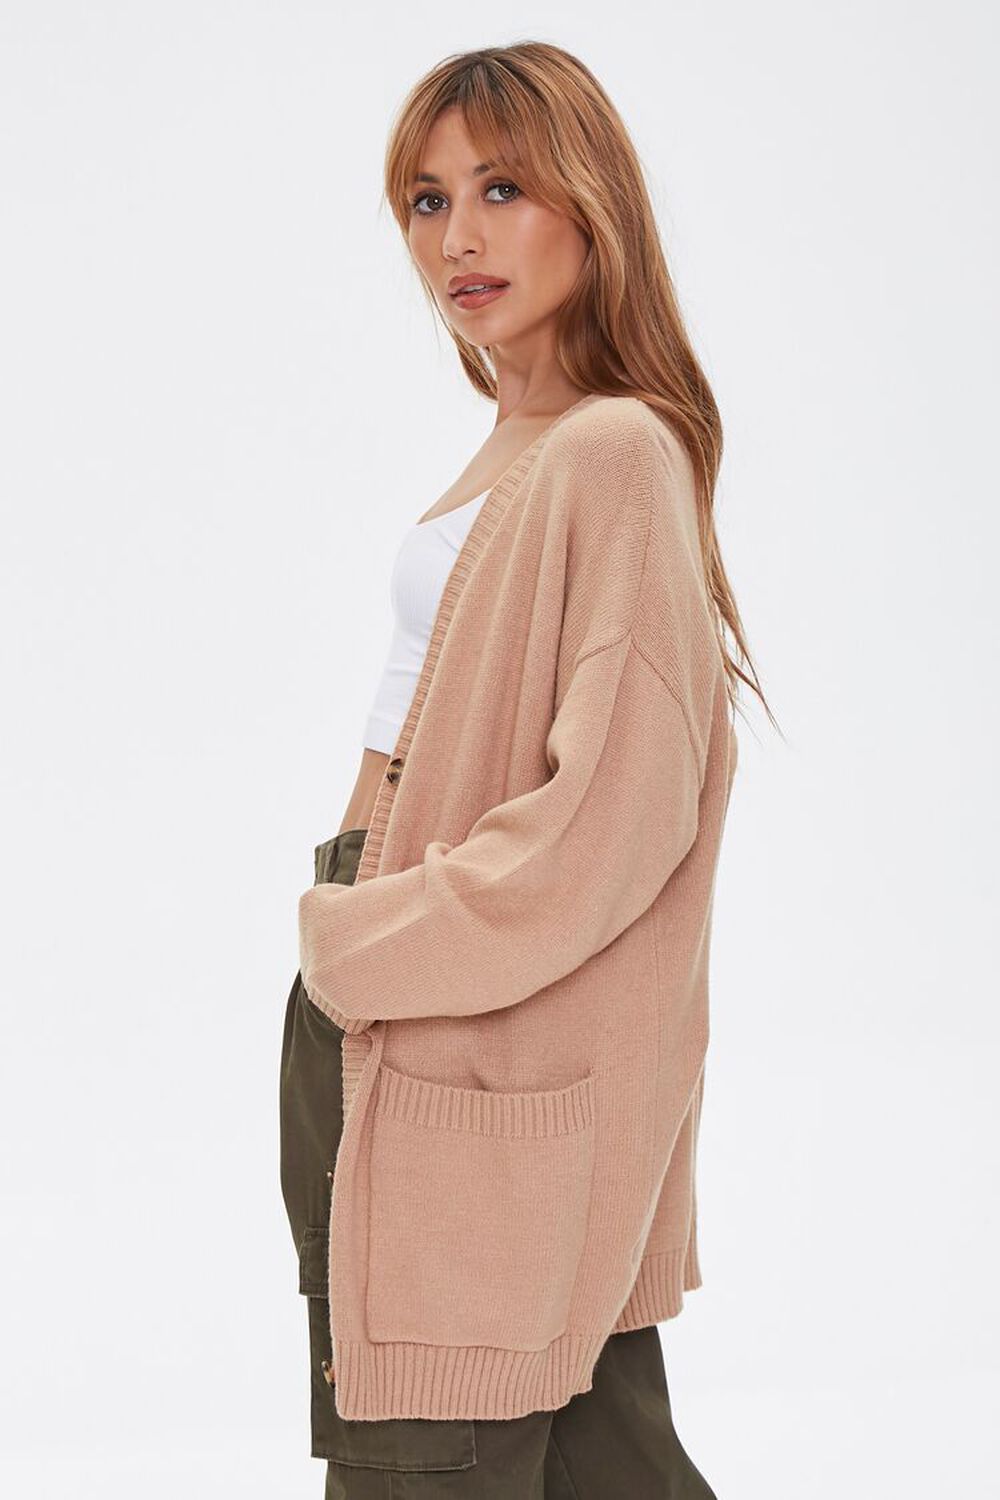 TAUPE Patch-Pocket Cardigan Sweater, image 2